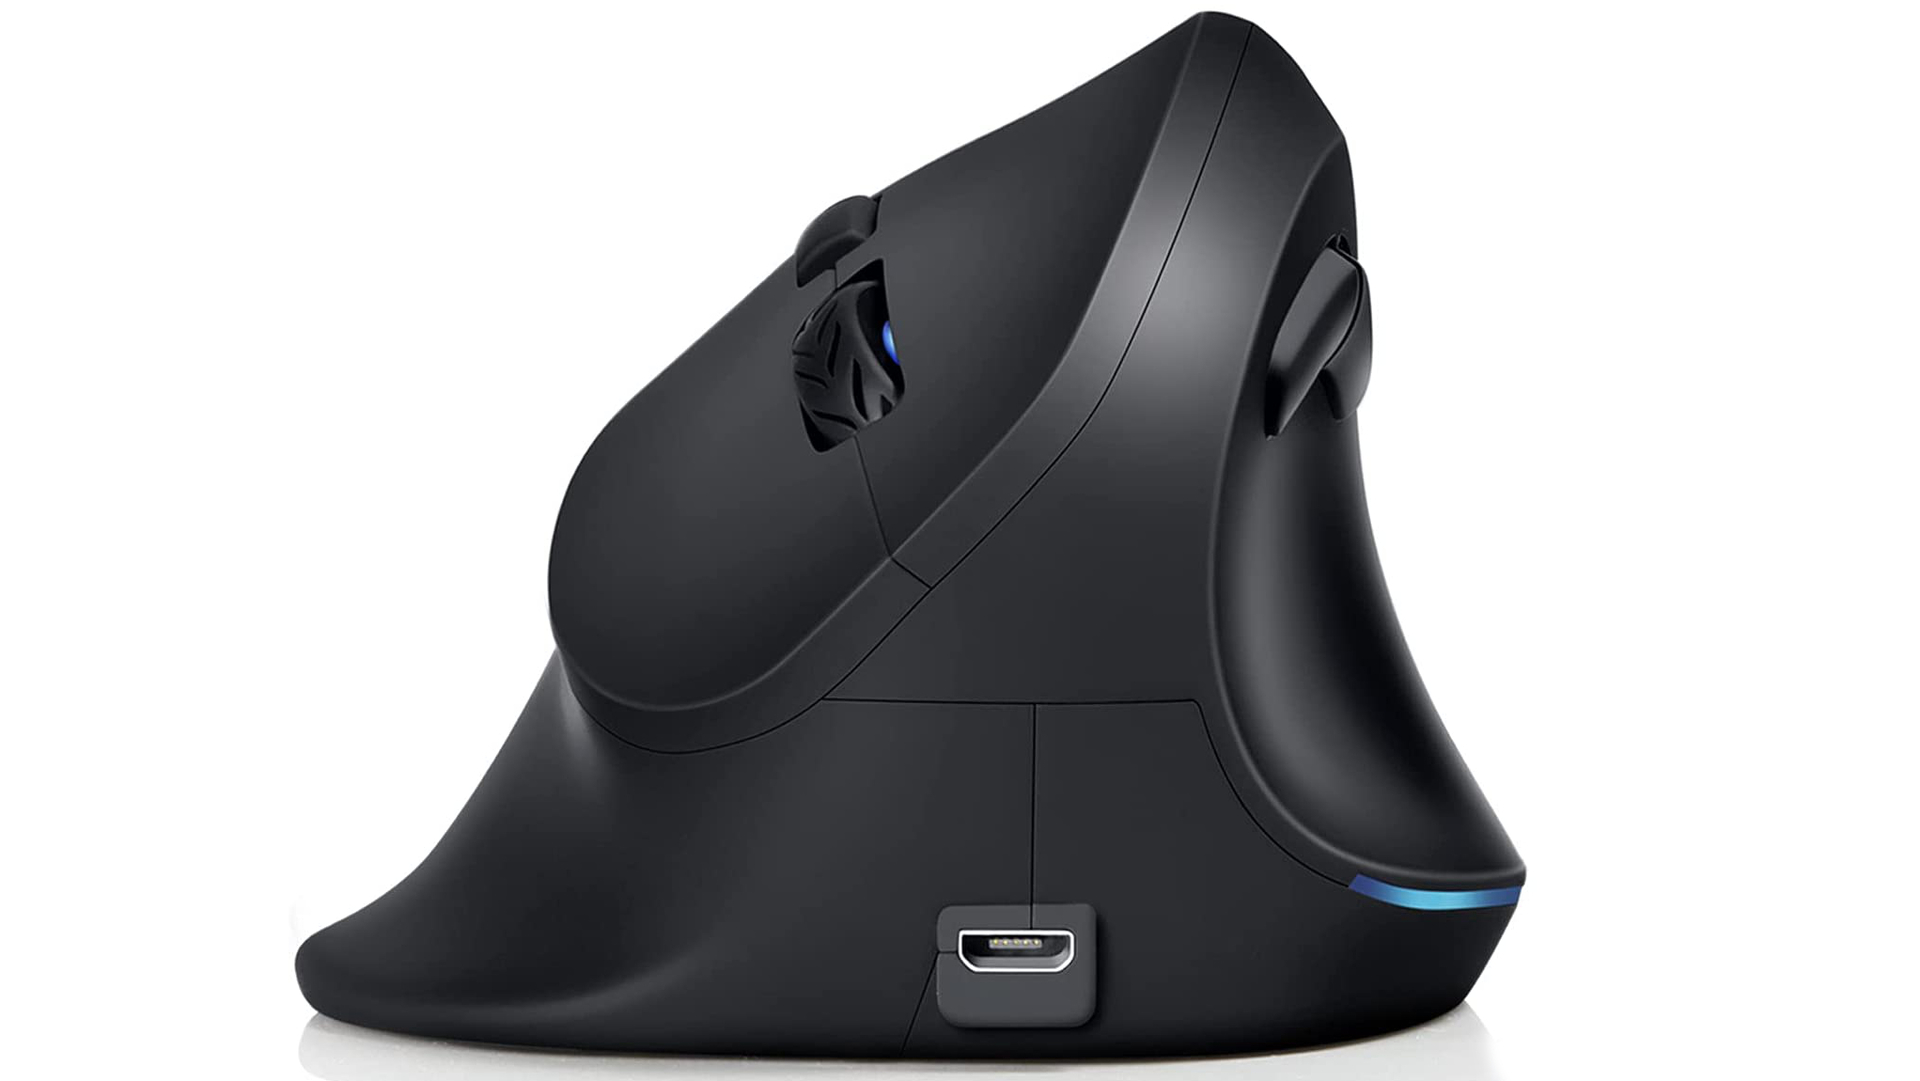 Autley Wireless Vertical Mouse